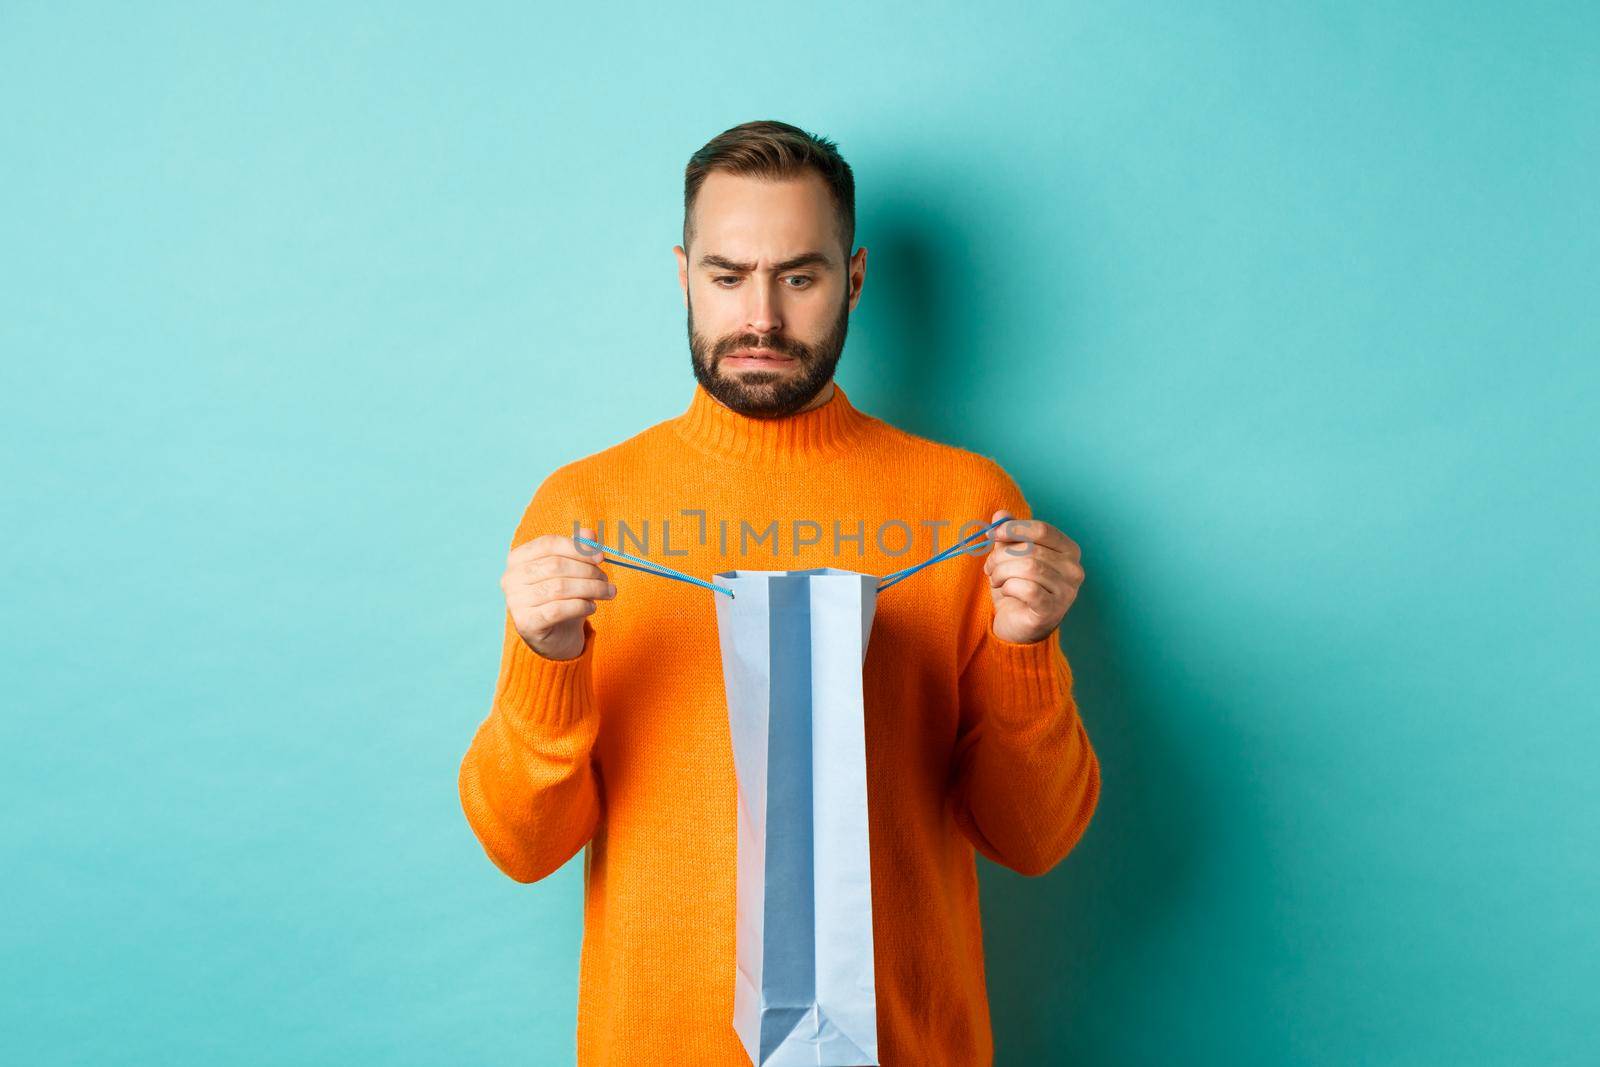 Disappointed man open shopping bag and dislike gift, frowning displeased, standing in orange sweater against turquoise background.